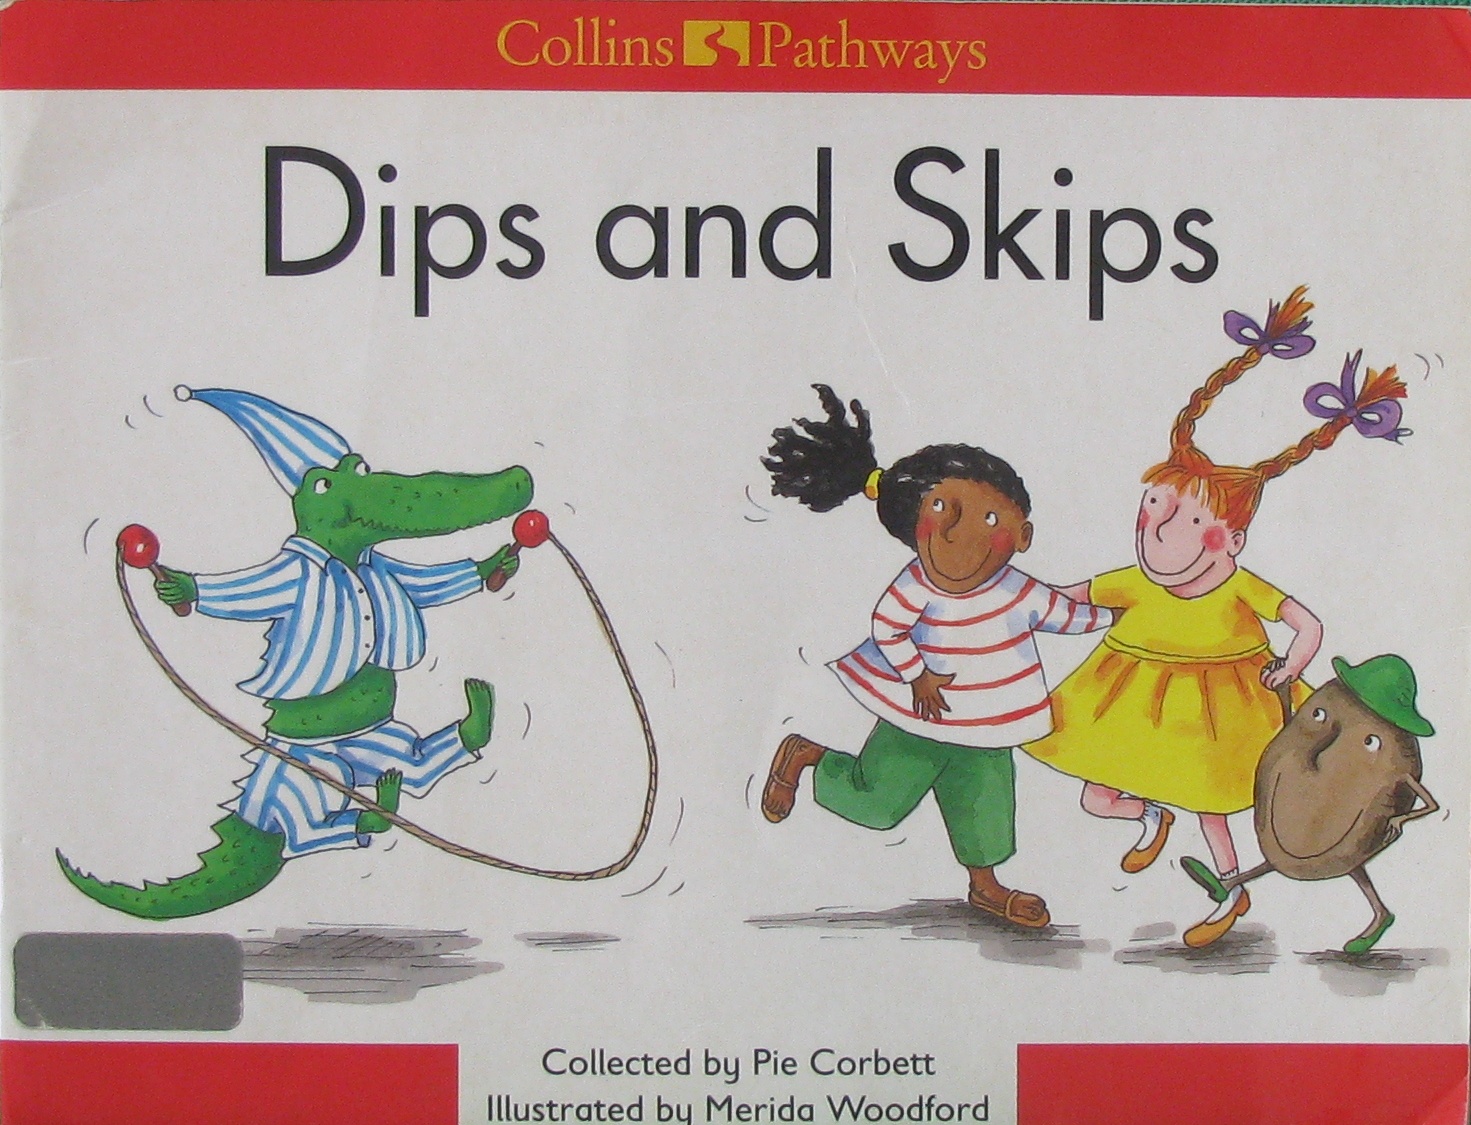 dips and skips reader collins pathways